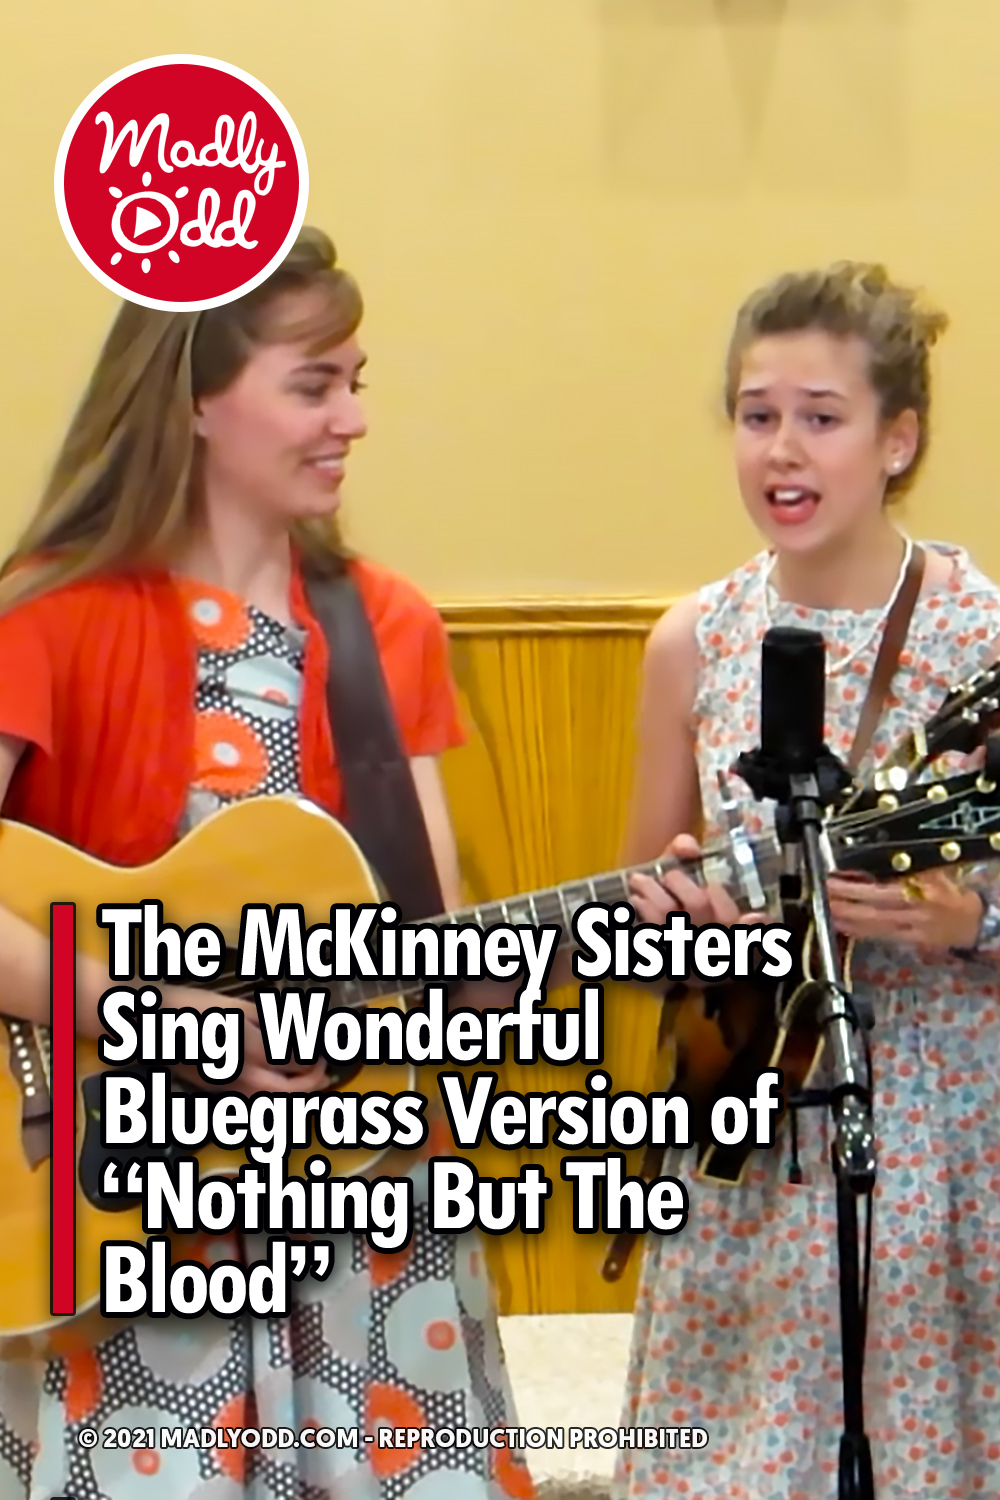 The McKinney Sisters Sing Wonderful Bluegrass Version of “Nothing But The Blood”